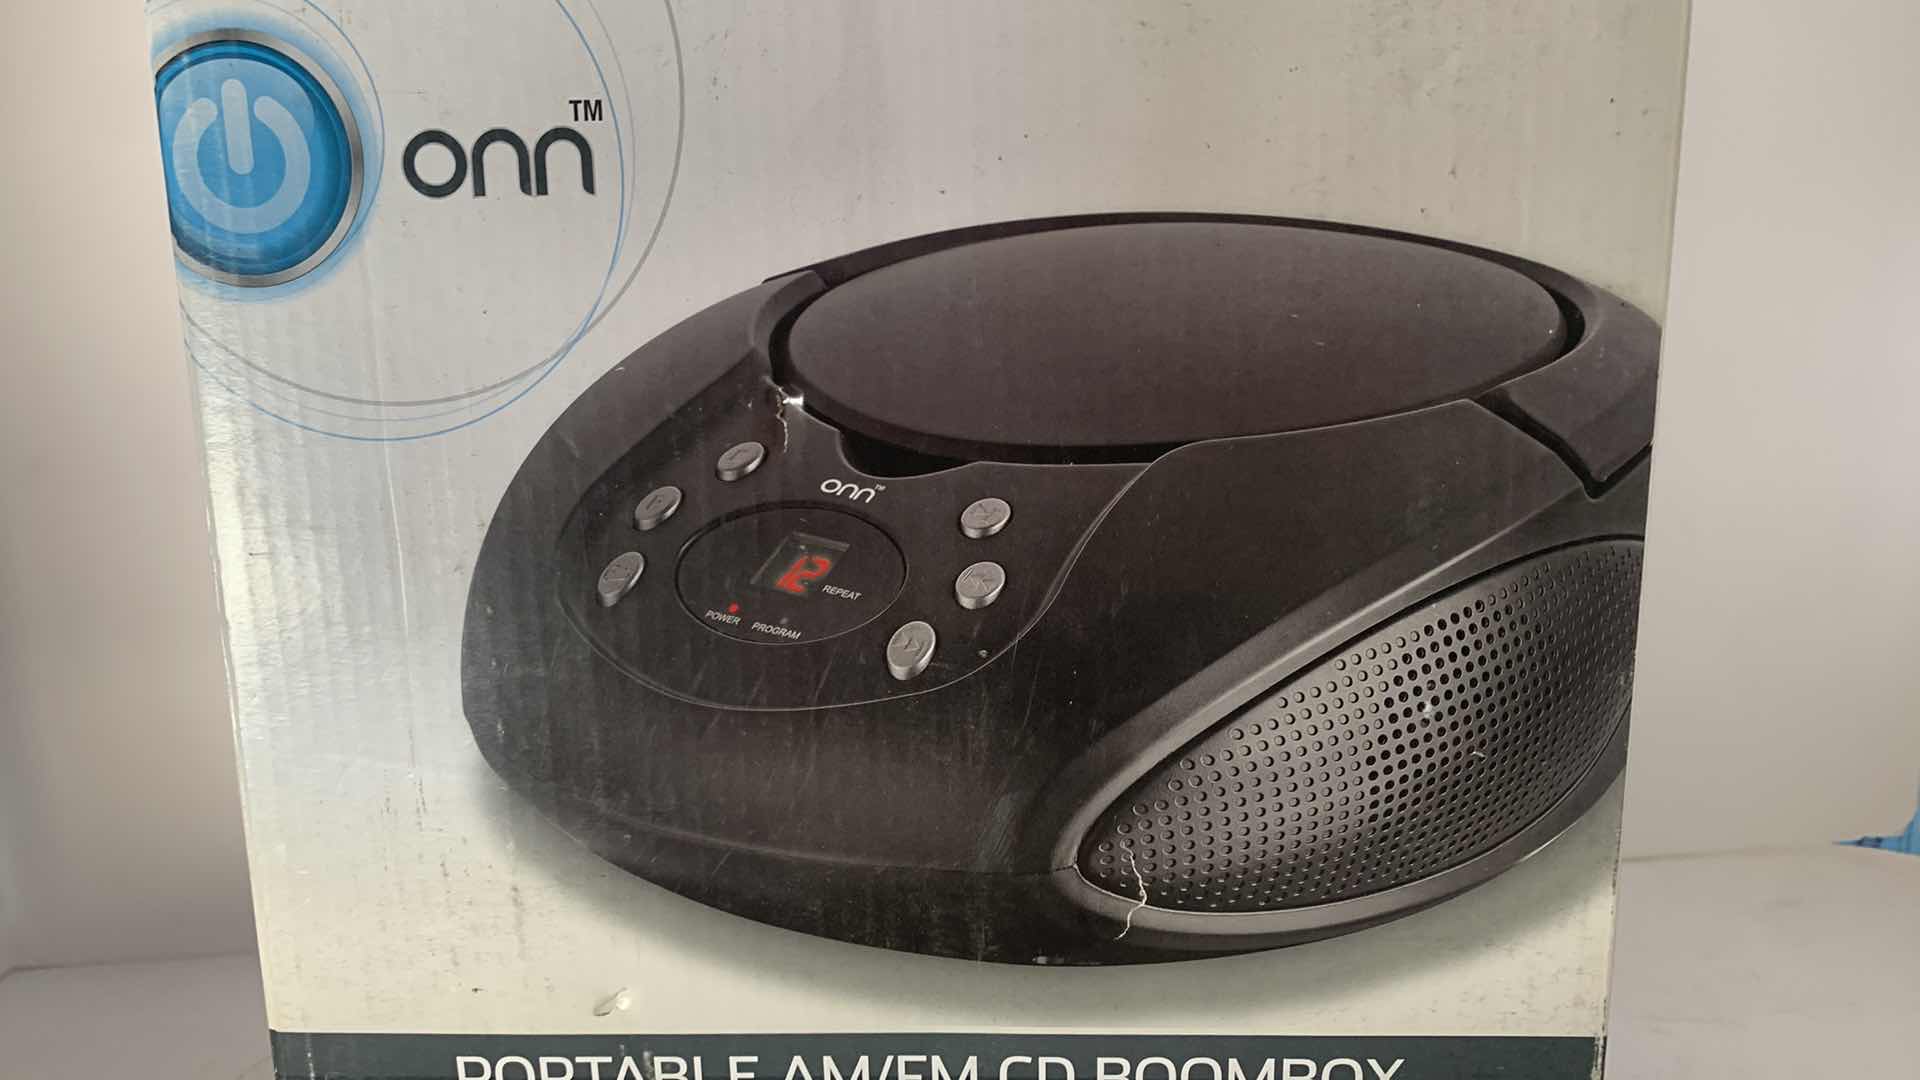 Photo 1 of onn PORTABLE AM/FM CD BOOMBOX BATTERY AND AC POWERED